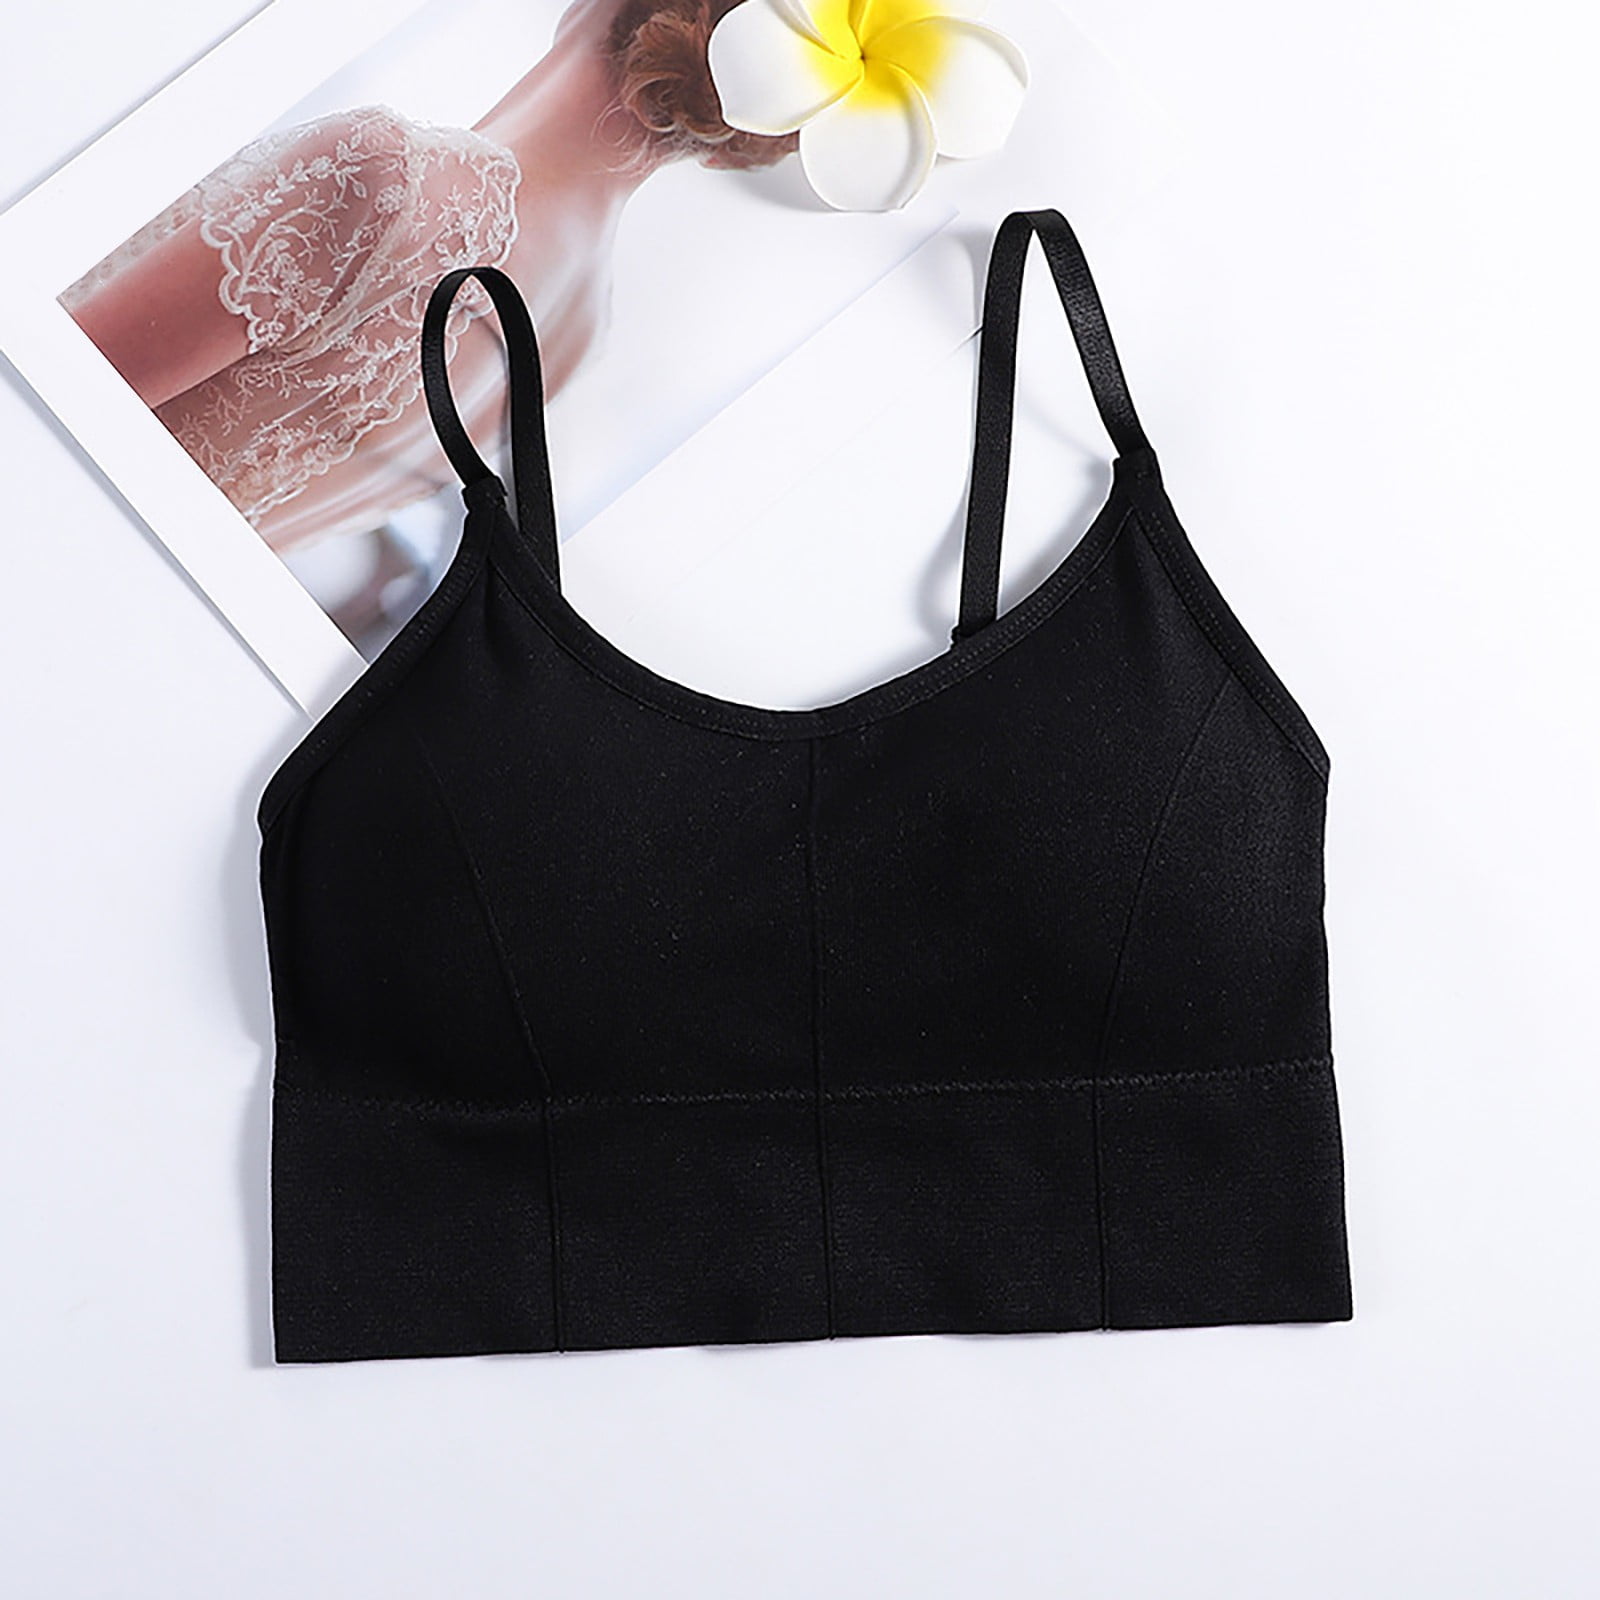 Sports Bras For Women High Support Large Bust Tank With Built In Bra Womens  Tank Tops Adjustable Strap Stretch Cotton Camisole With Built In Padded Shelf  Bra Small Color A 